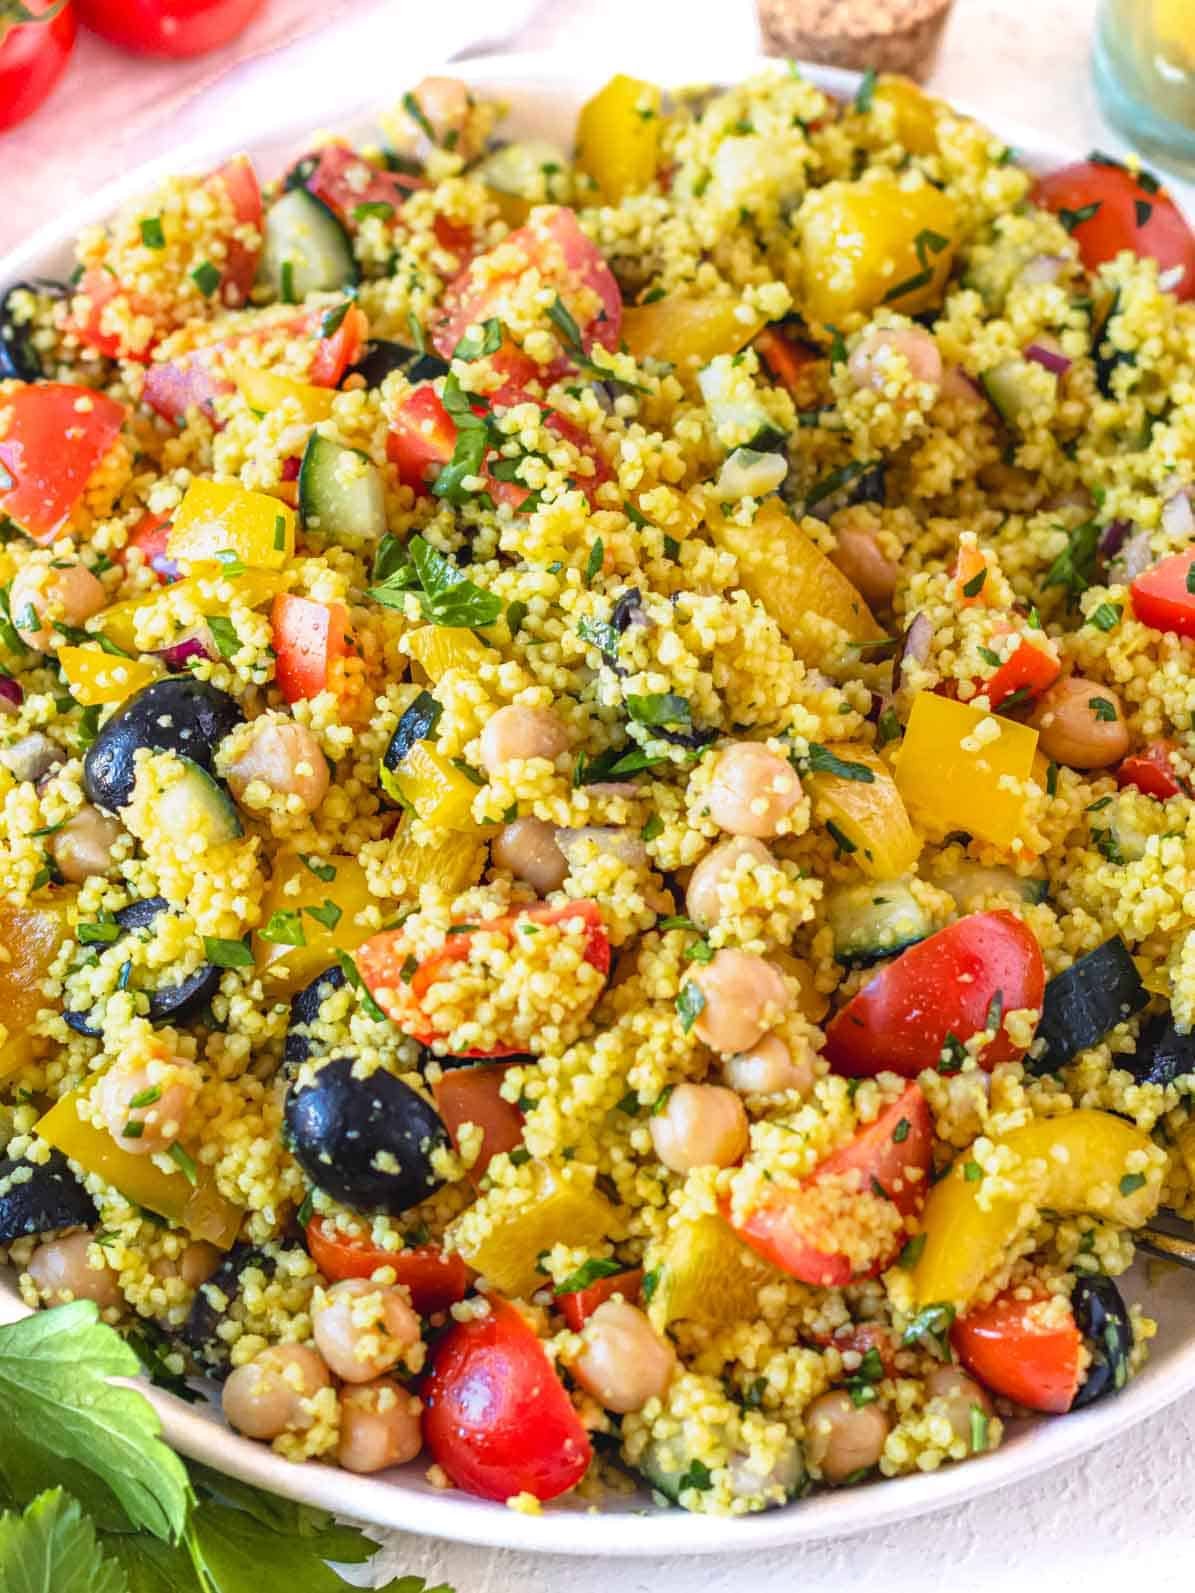 easy couscous salad with olives, cherry tomatoes and chickpeas on a plate